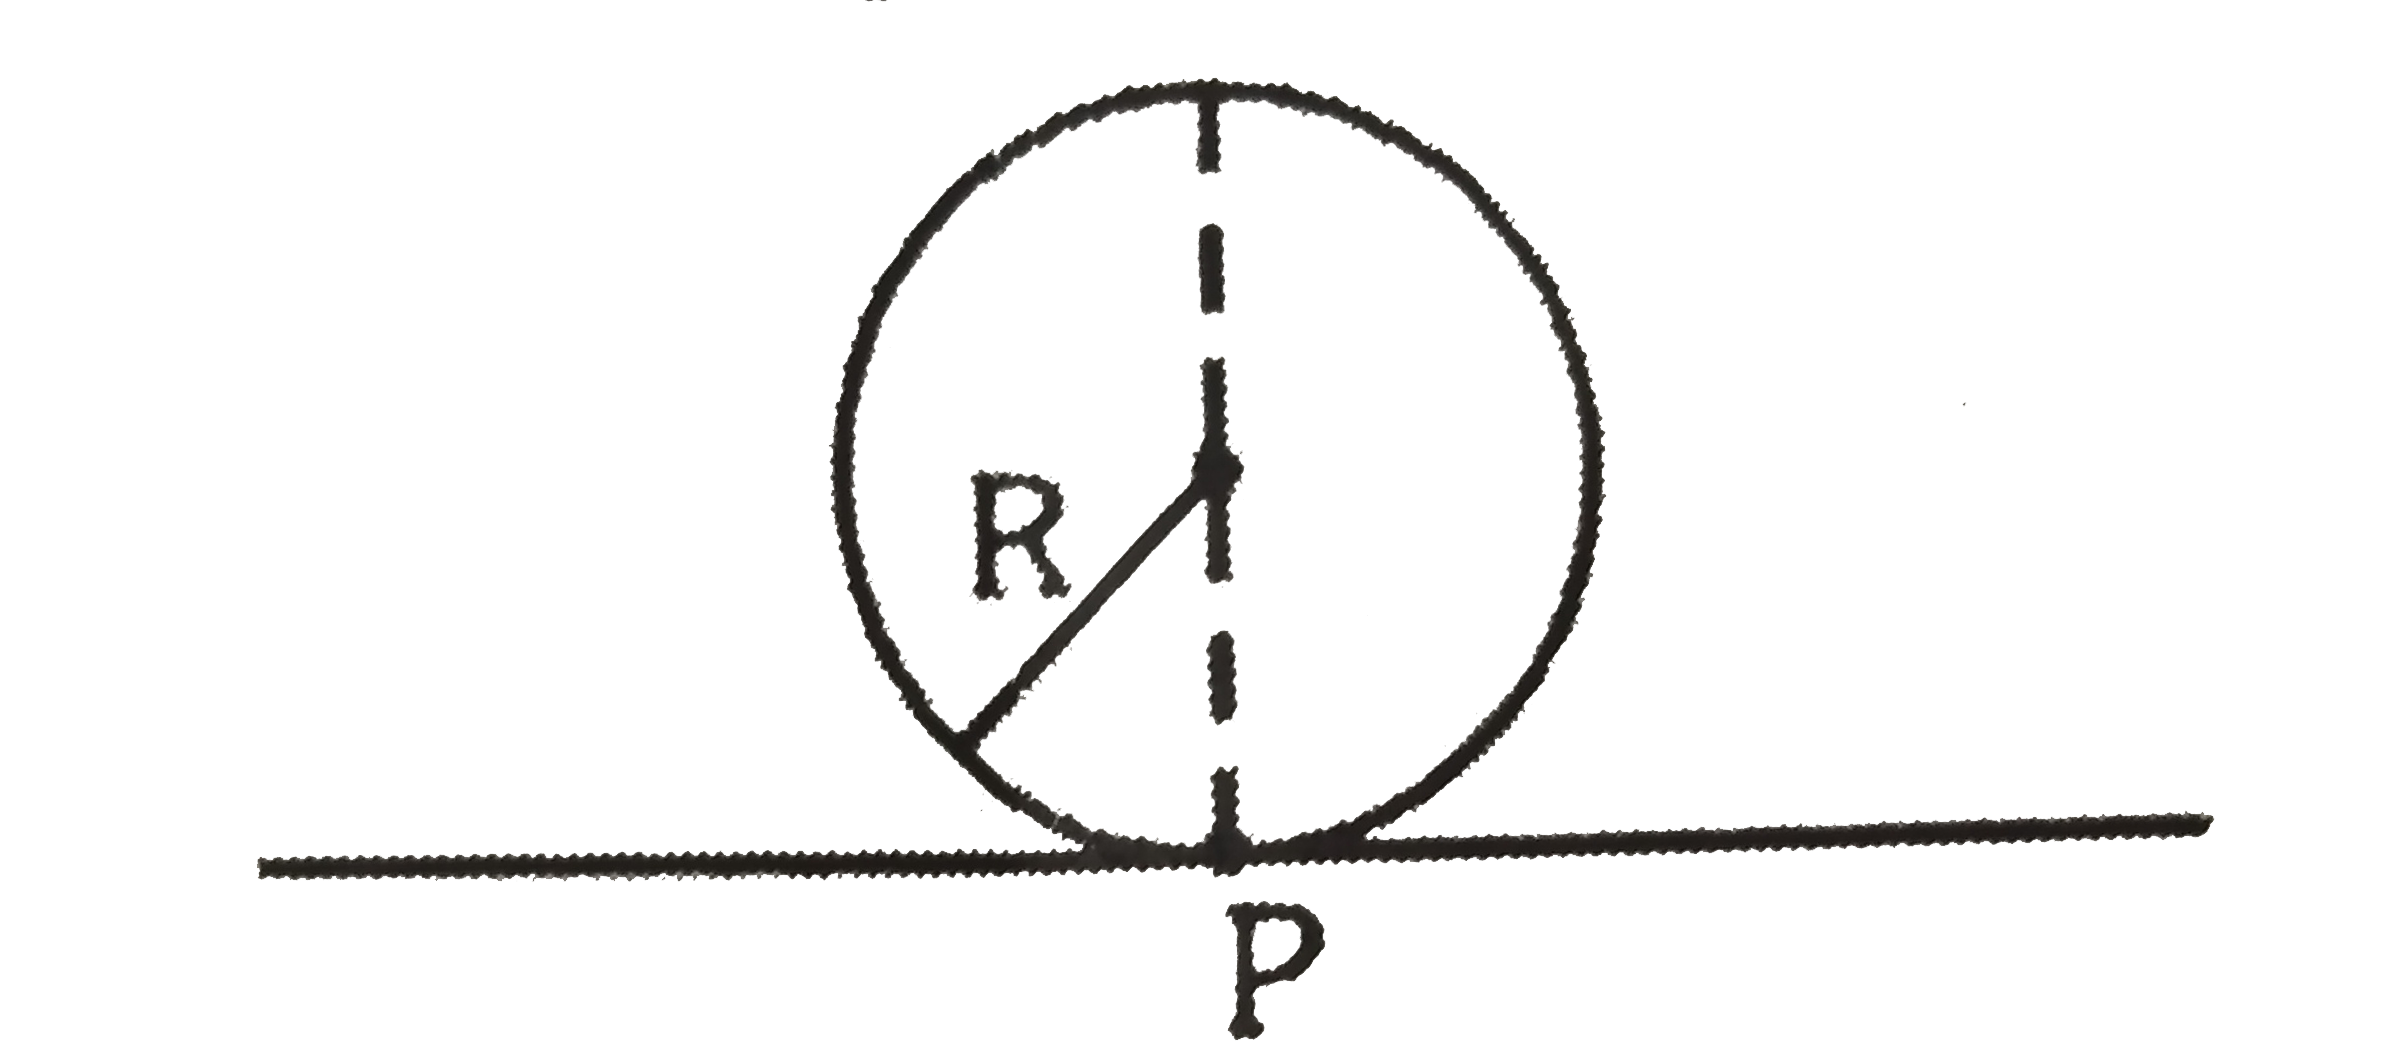 A wheel of radius 'R' is placed on ground and its contact point 'P'. If wheel starts rolling without slipped and completes half a revolution, find the displacement of point.